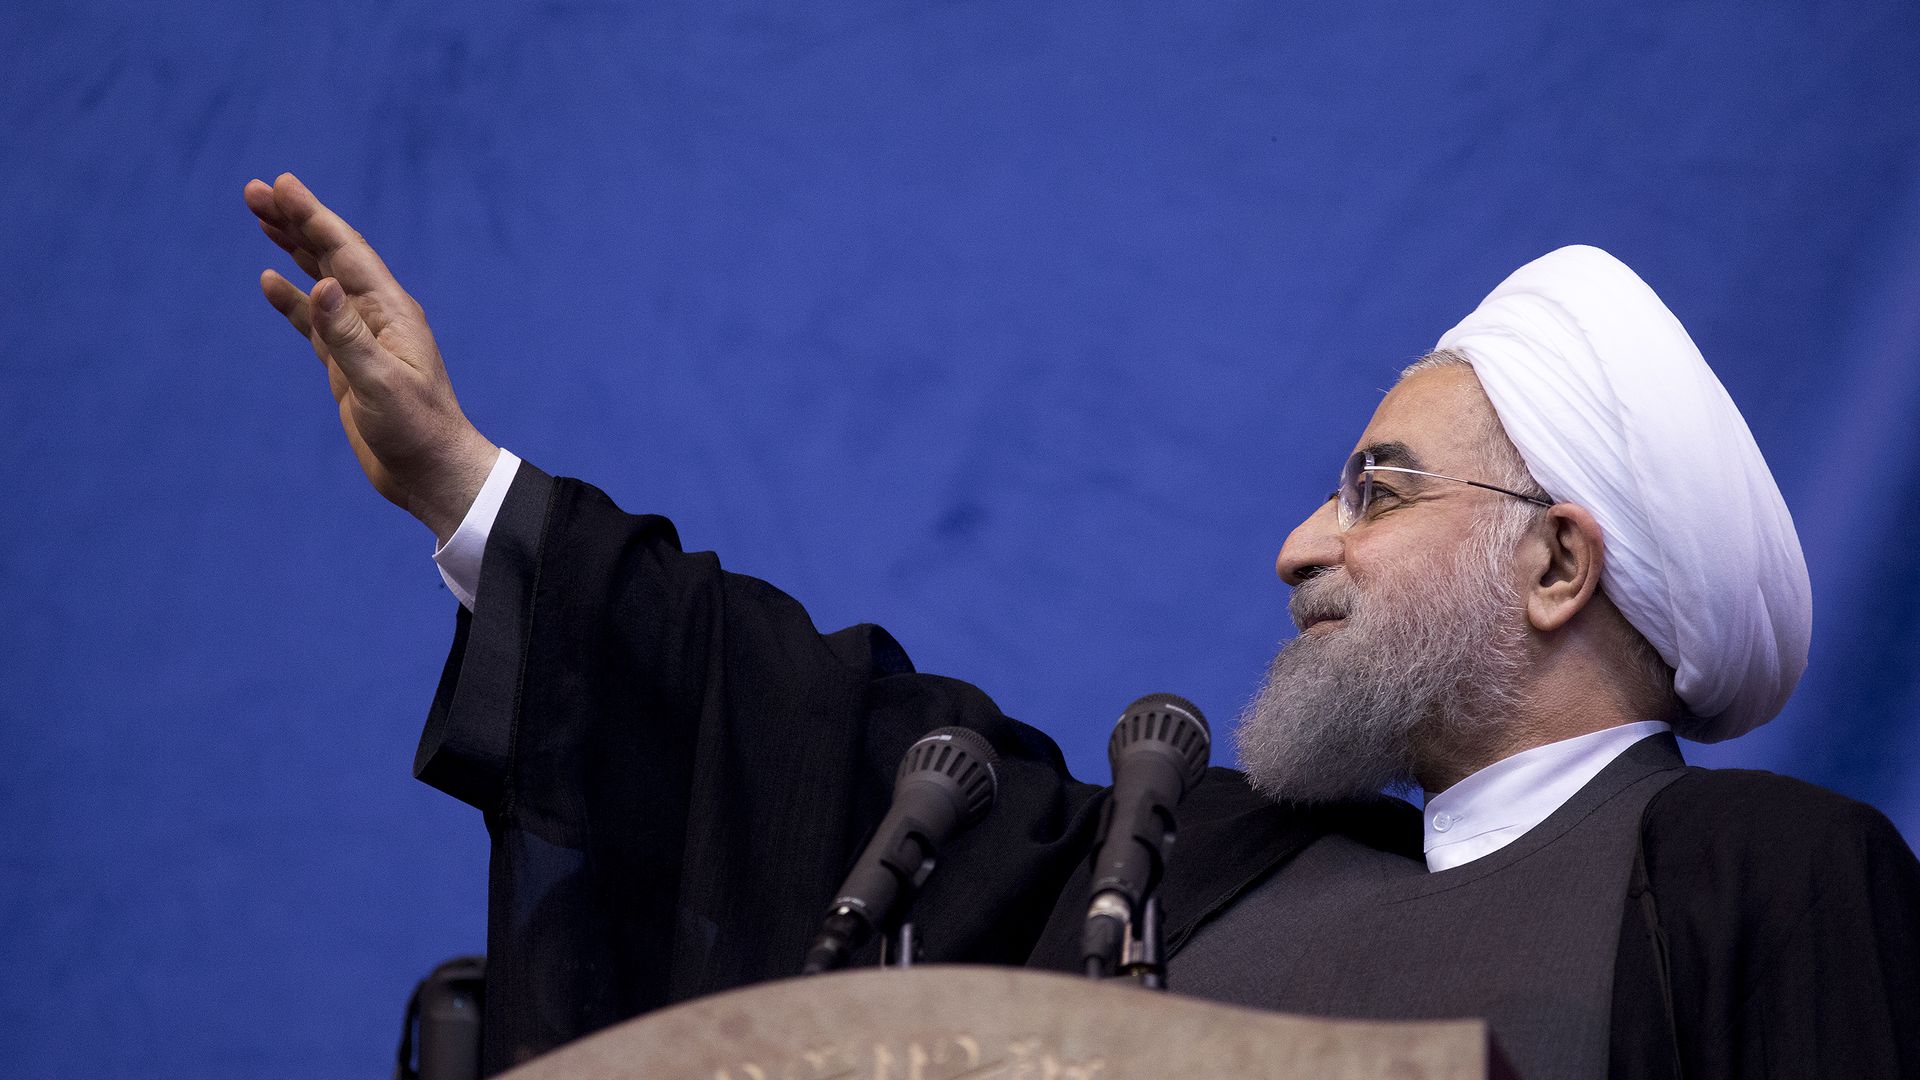 Iran will respect nuclear deal as long as interests preserved: Rouhani